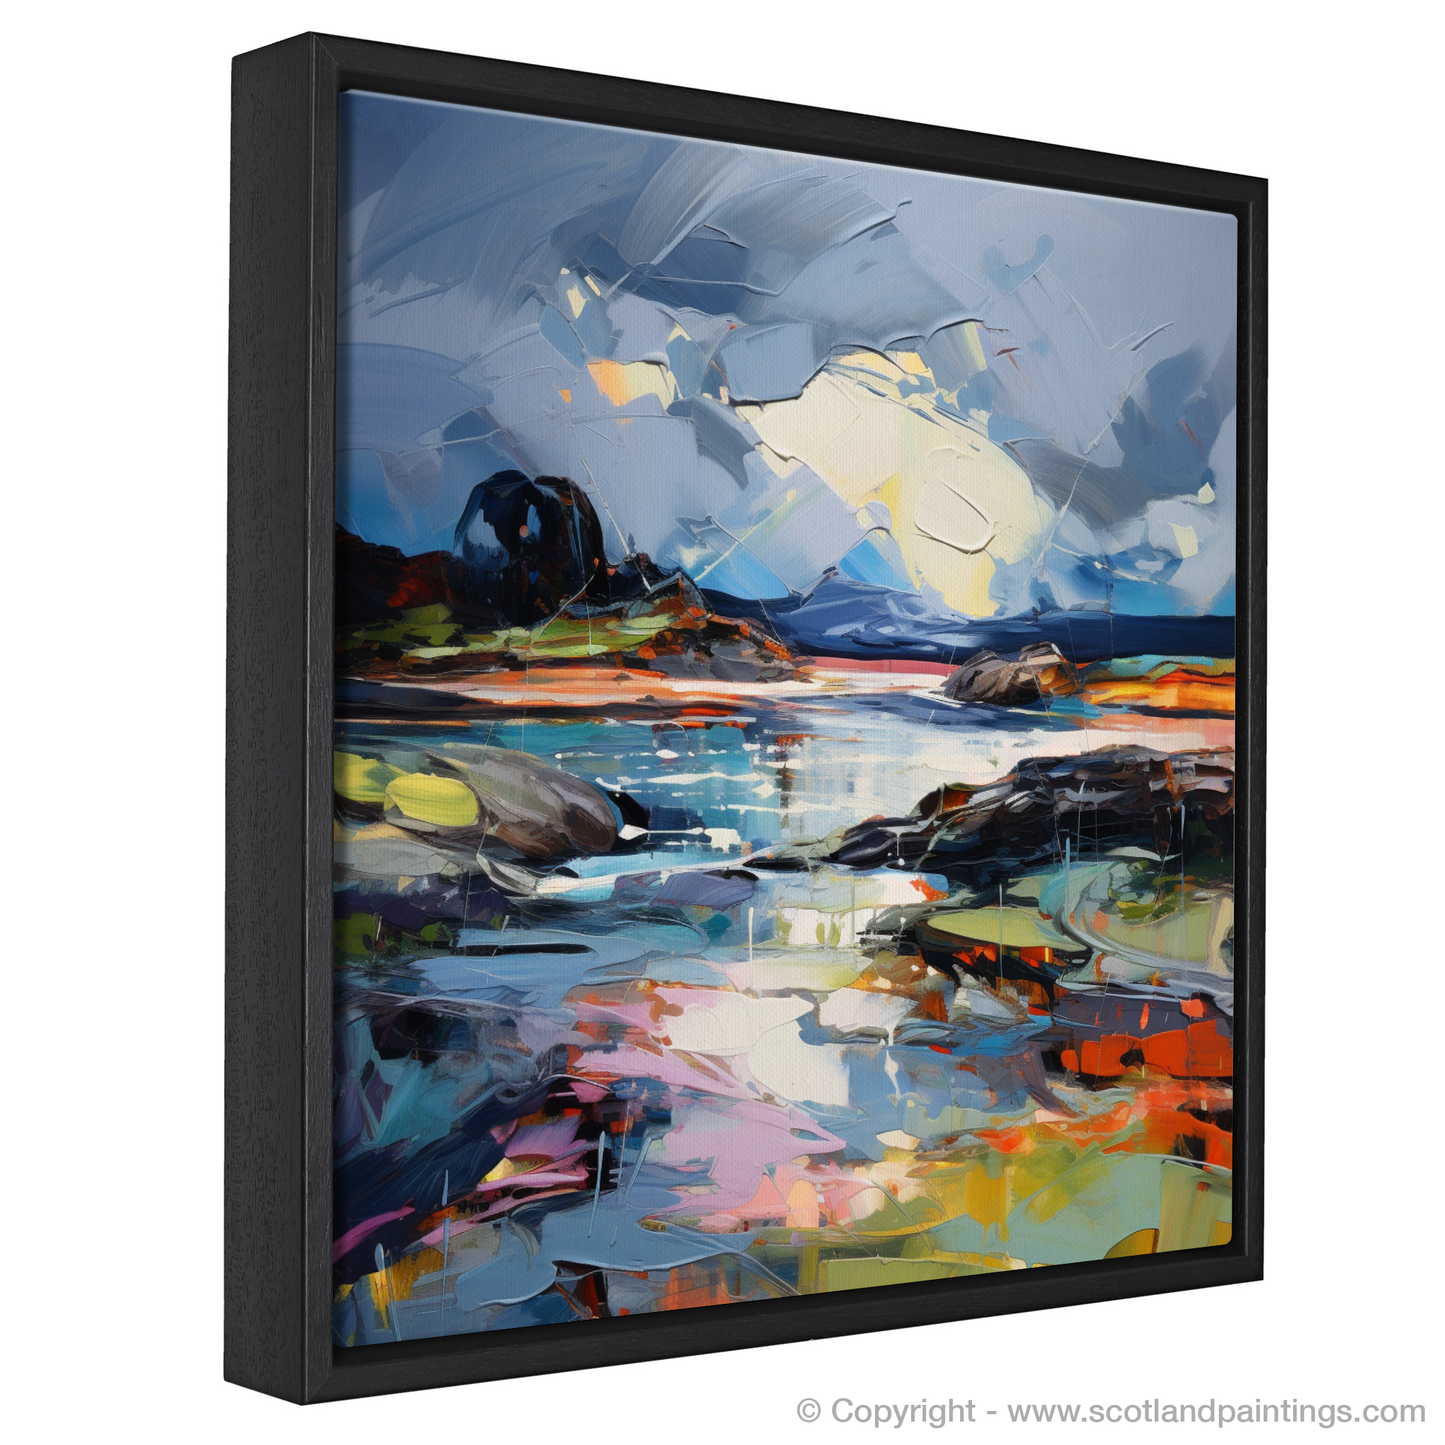 Painting and Art Print of Ardtun Bay with a stormy sky entitled "Storm over Ardtun Bay: An Expressionist Odyssey".